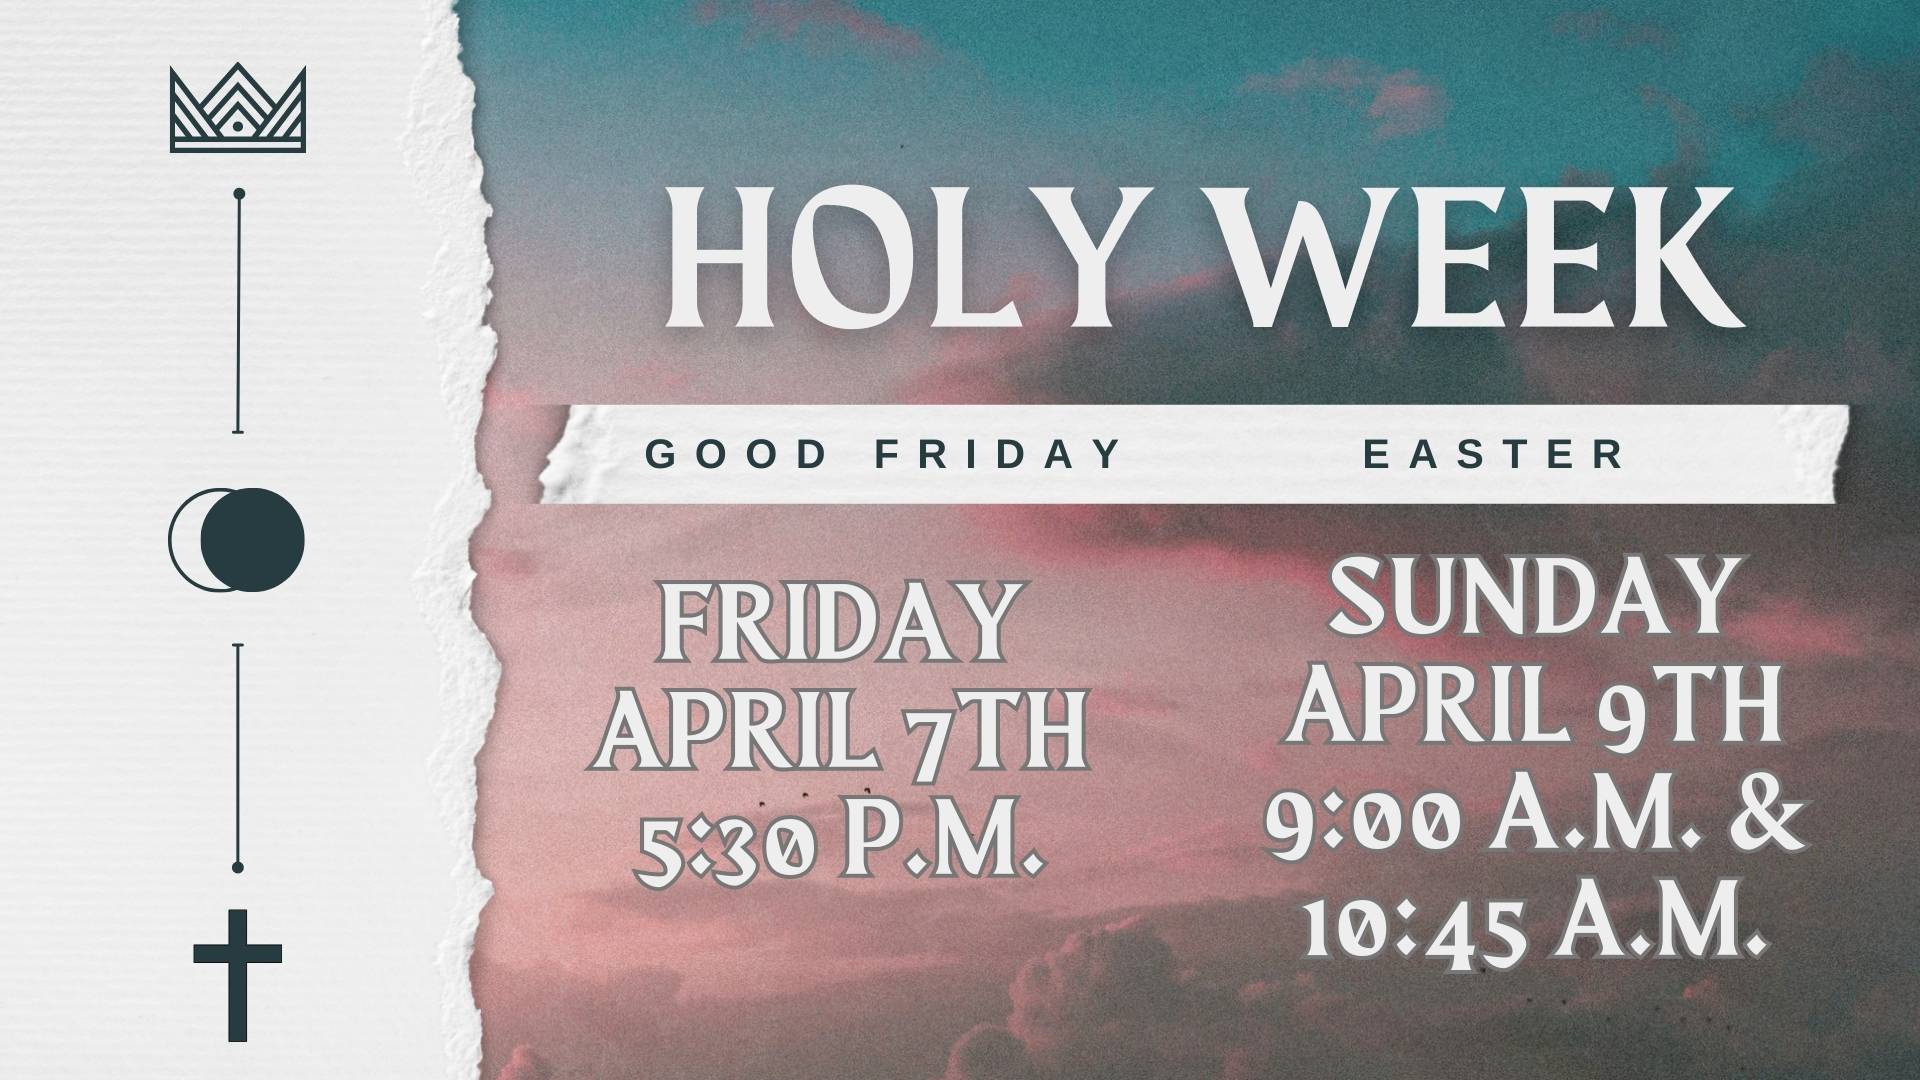 Good Friday and Easter Services